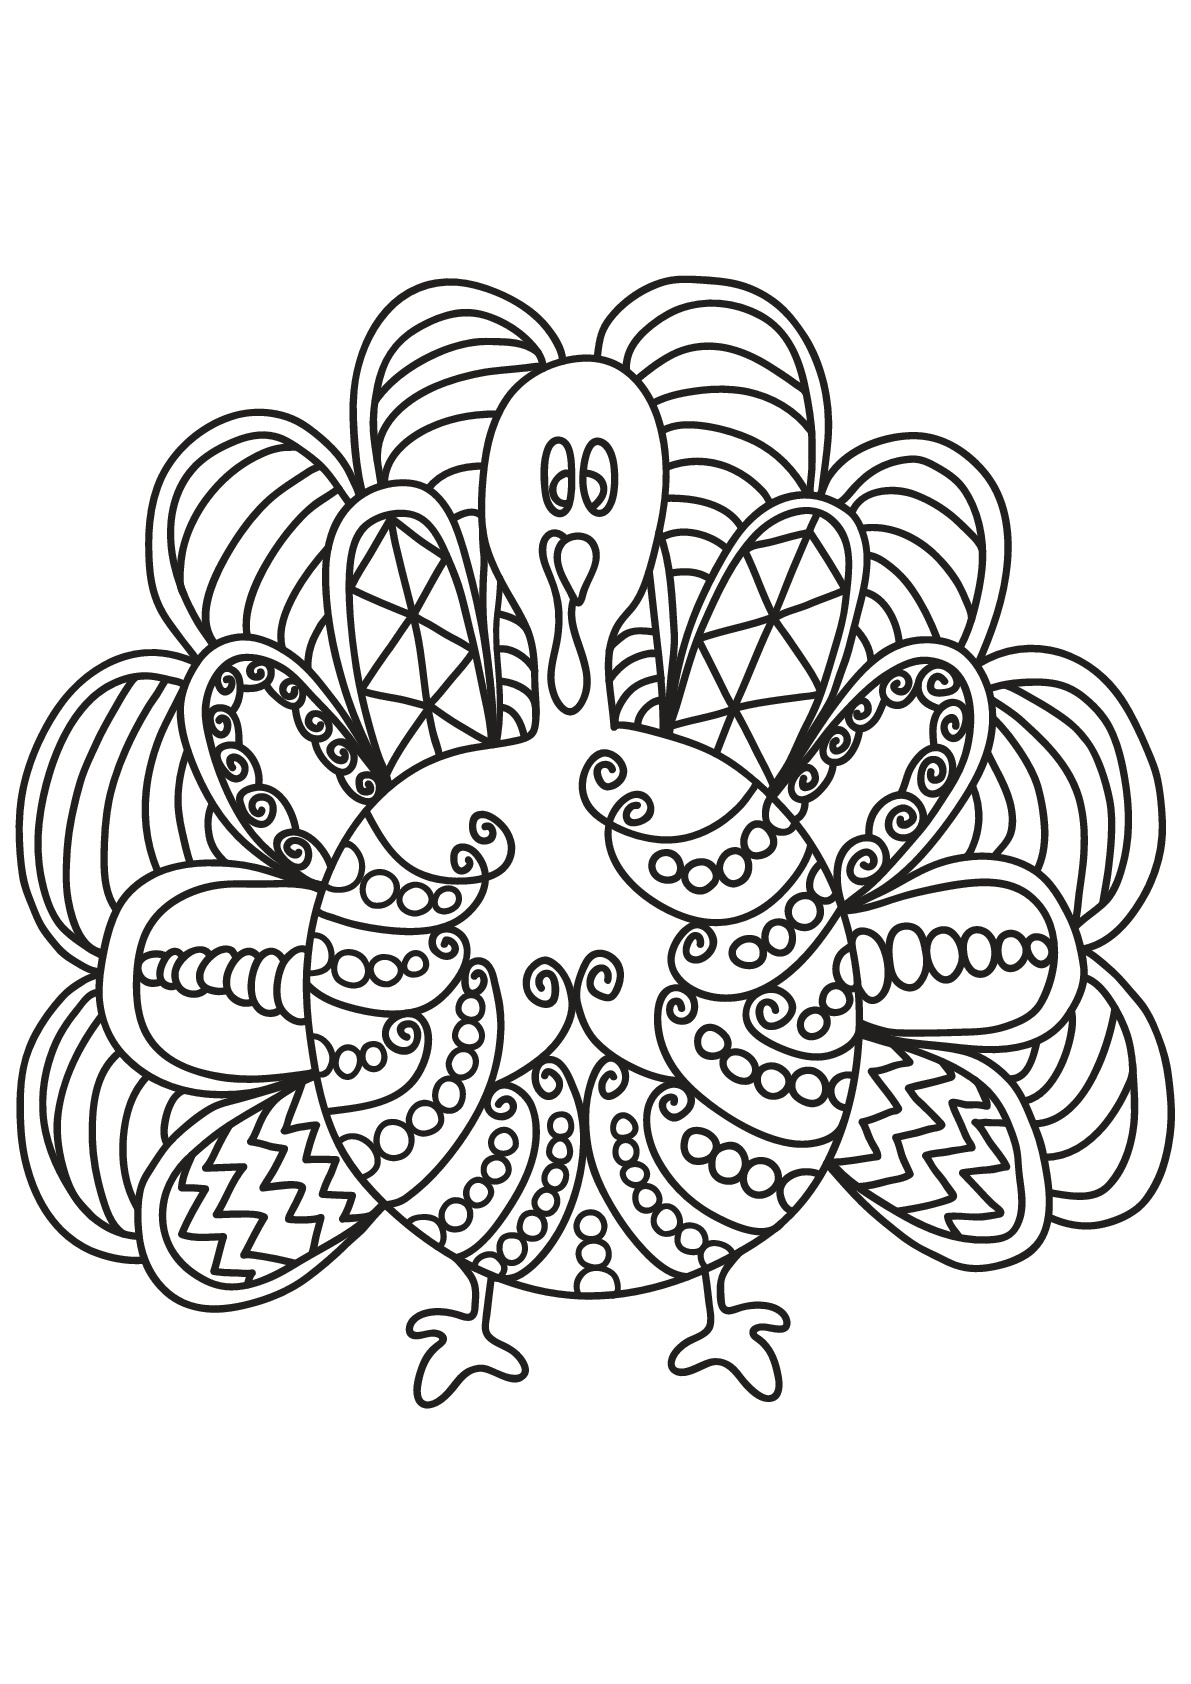 Download Free Book Turkey Birds Adult Coloring Pages